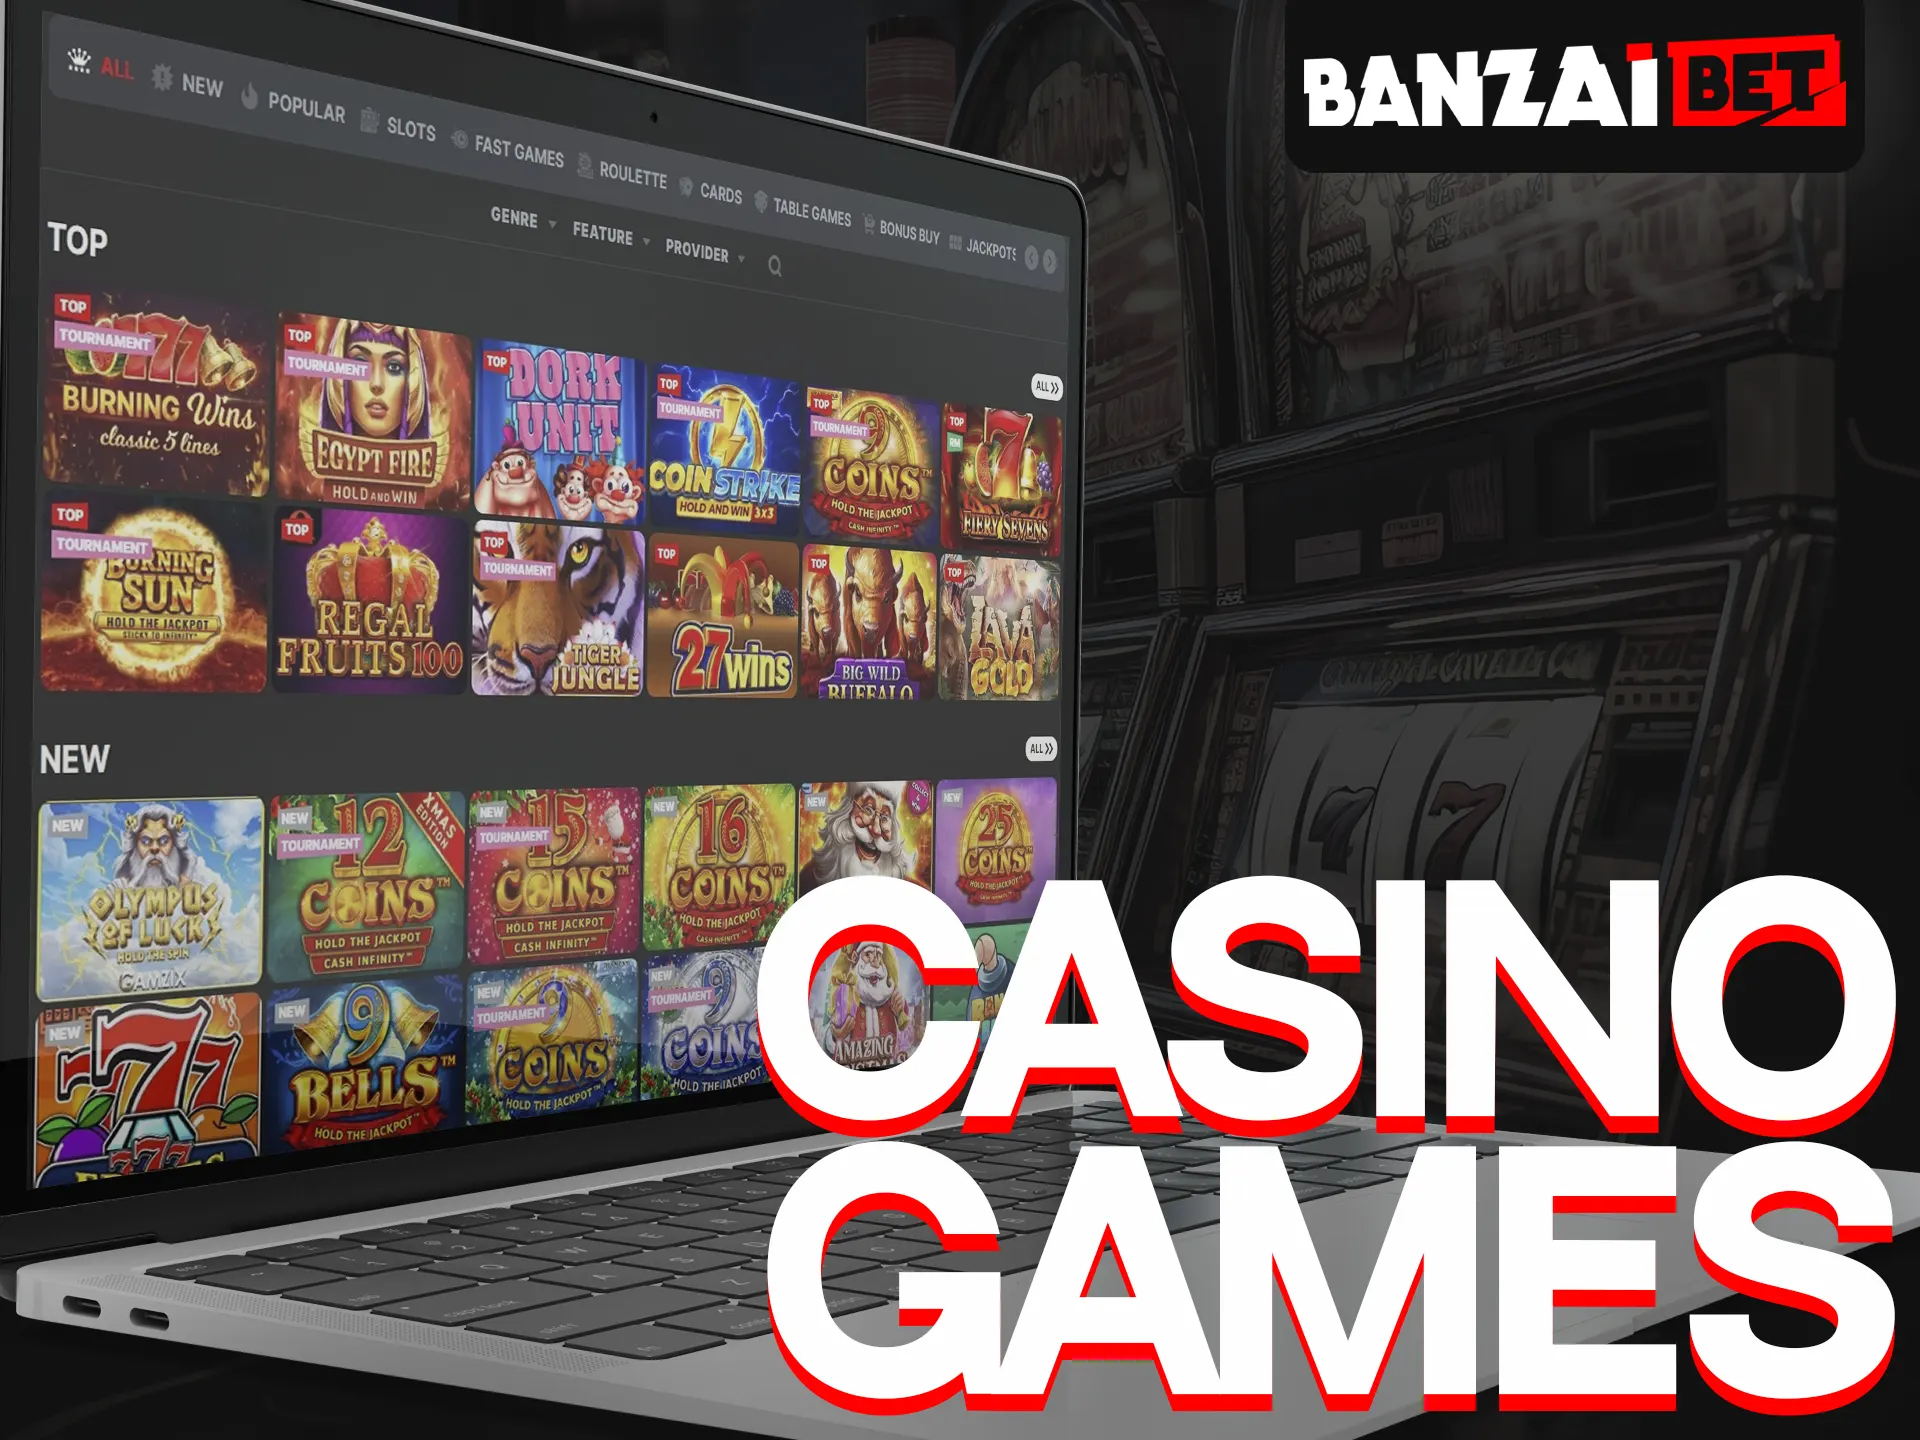 Play the most popular casino games at Banzai Bet.